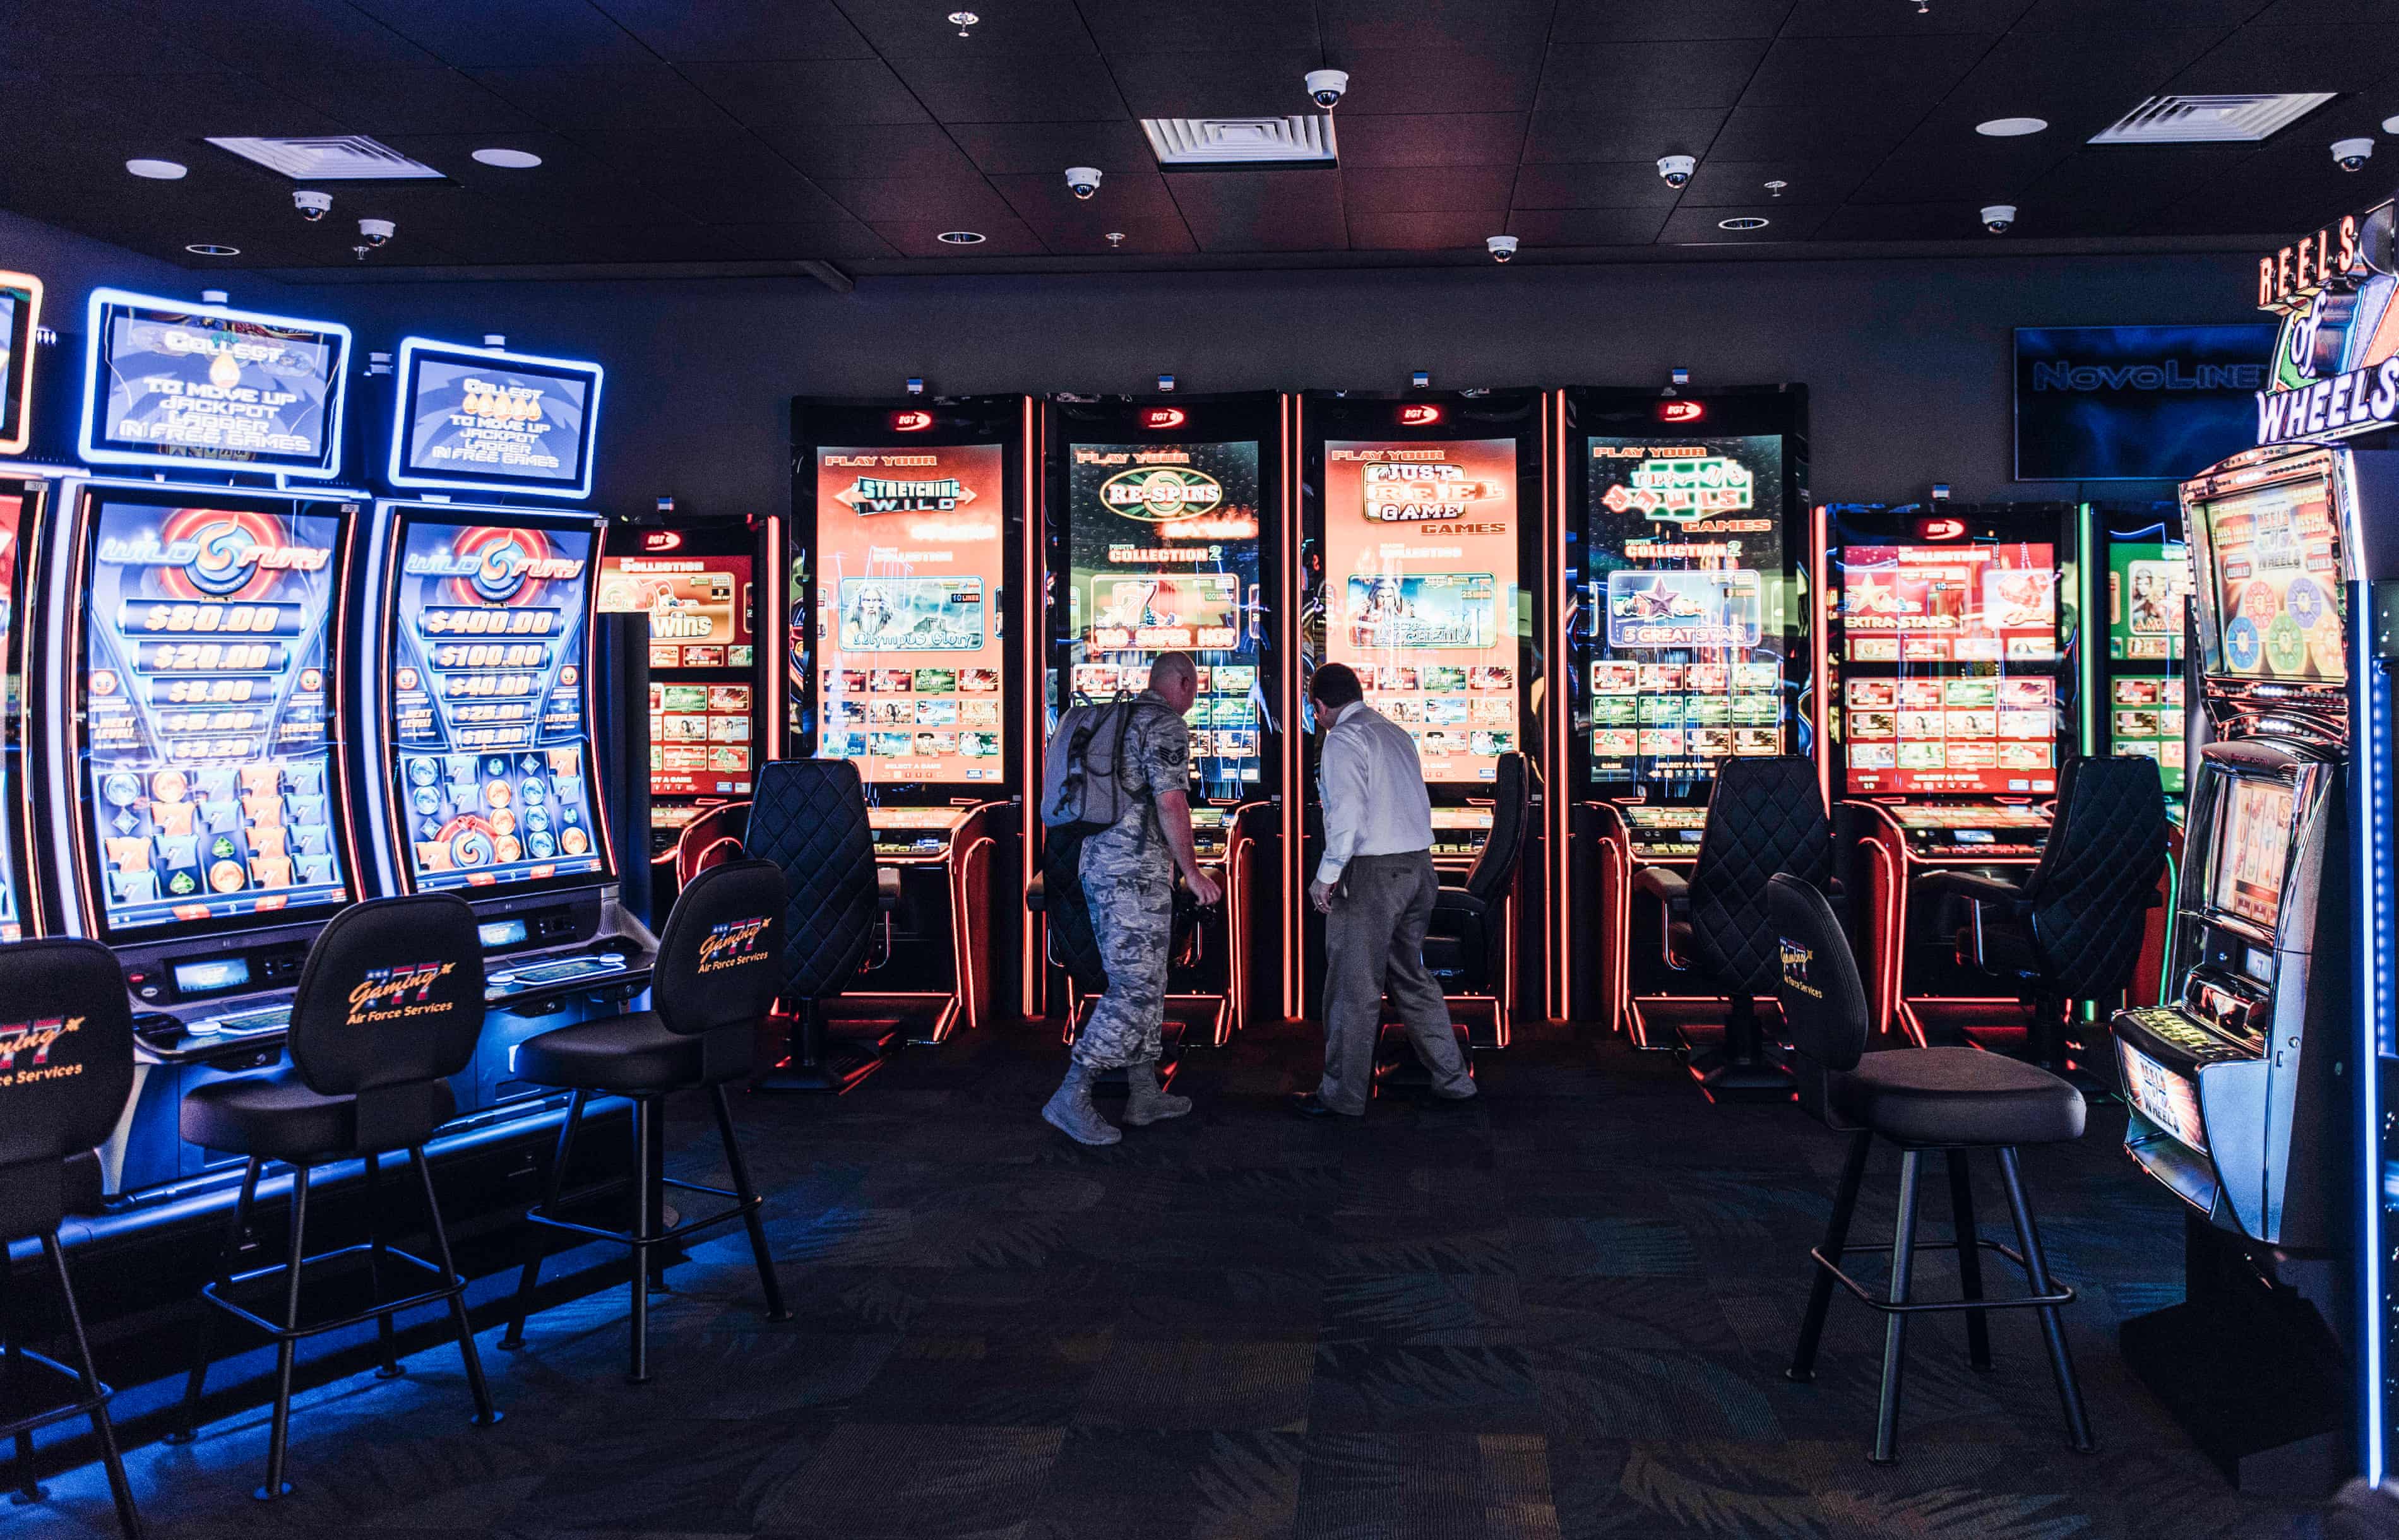 ‘Gambling addiction on steroids’: fears of betting crisis at heart of US military (theguardian.com)